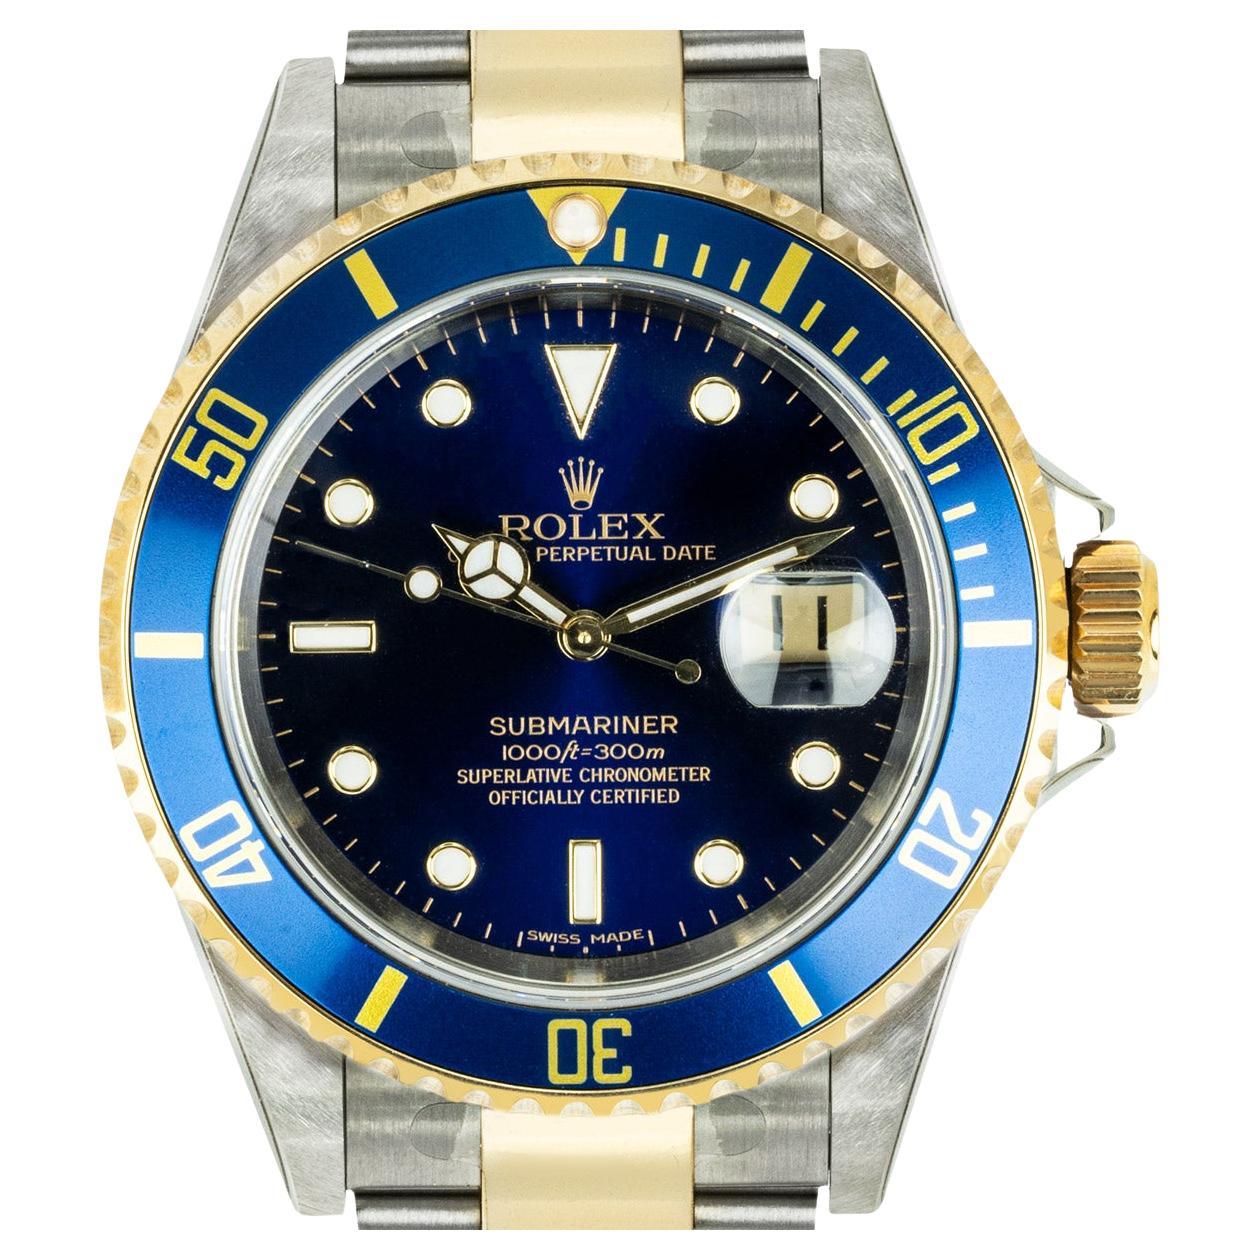 An Unworn Stainless Steel & 18k Yellow Gold Oyster Perpetual Submariner Date NOS Men's Wristwatch, blue dial with applied hour markers, date at 3 0'clock, an 18k yellow gold uni-directional rotating bezel with a blue bezel insert, a stainless steel